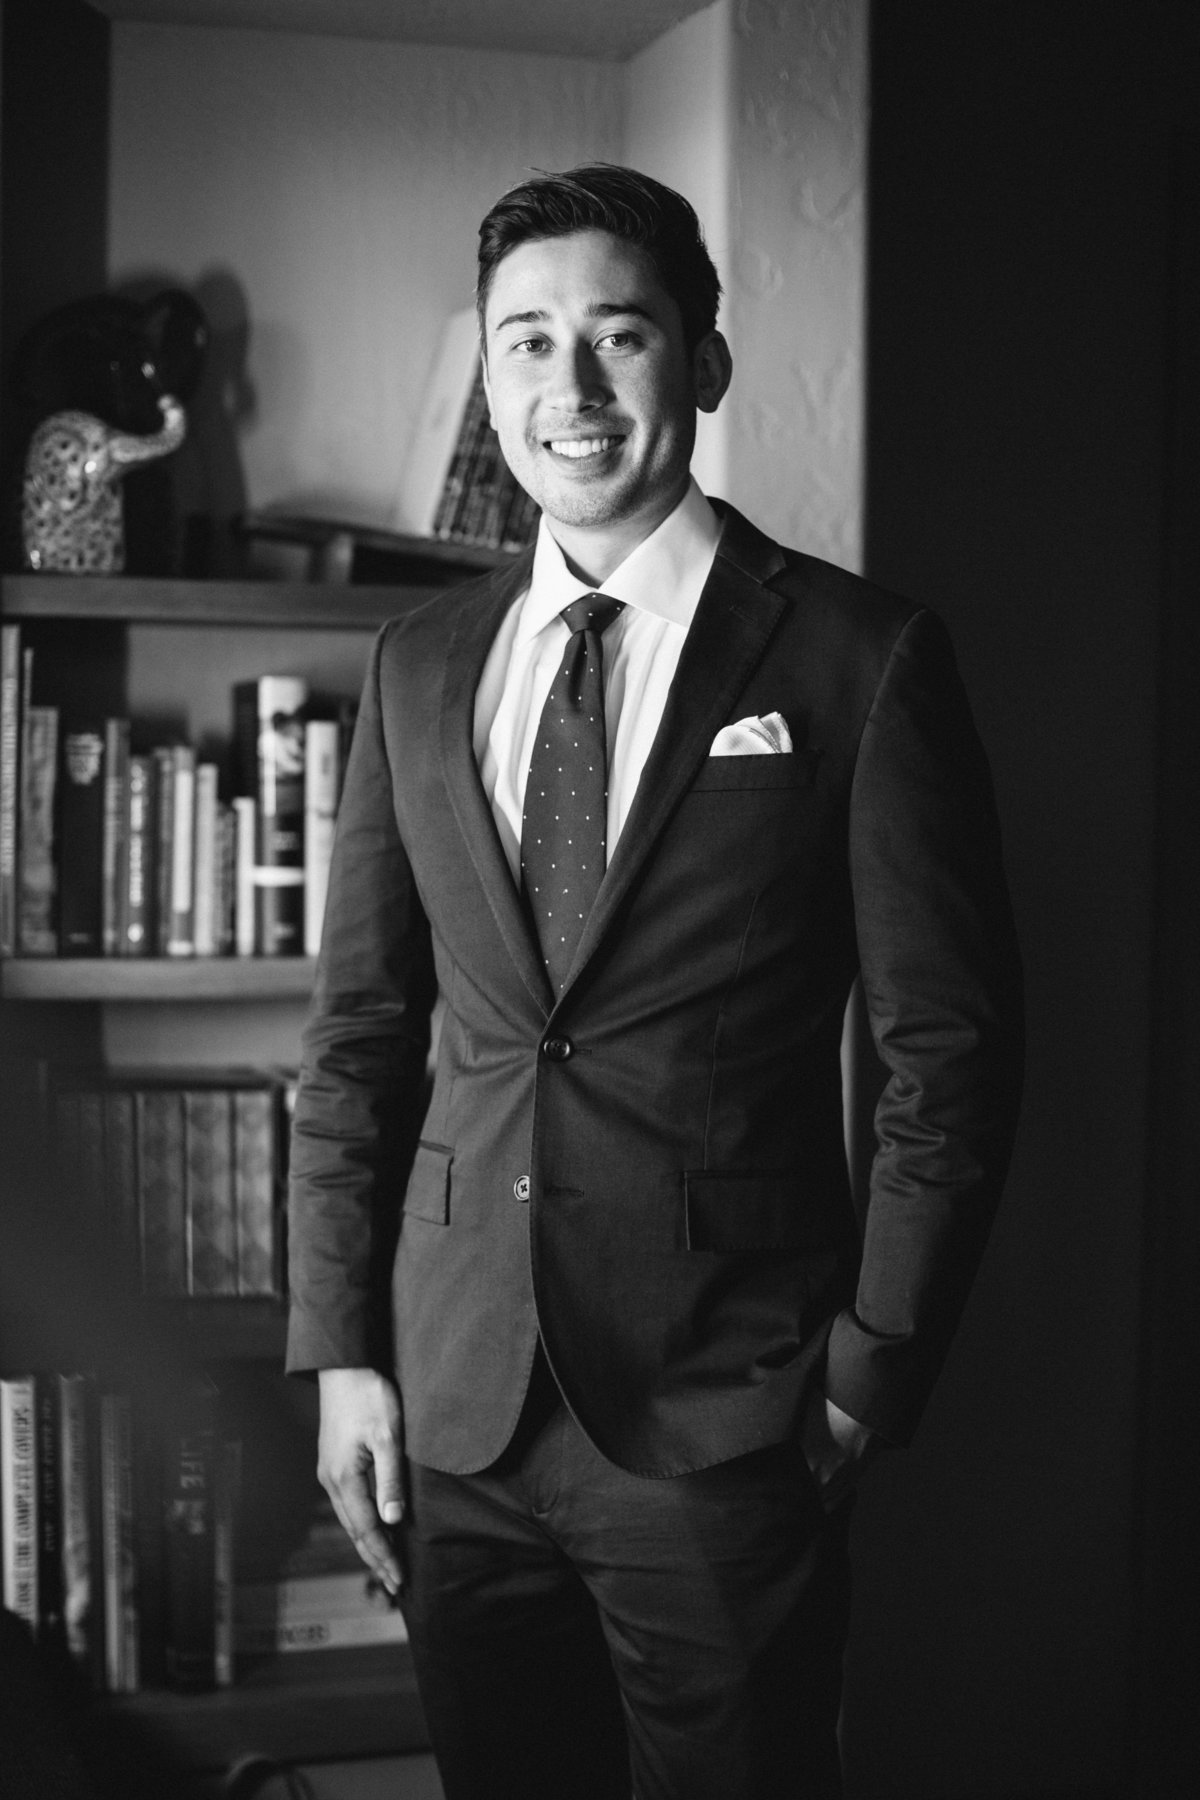 Groom photo in black and white